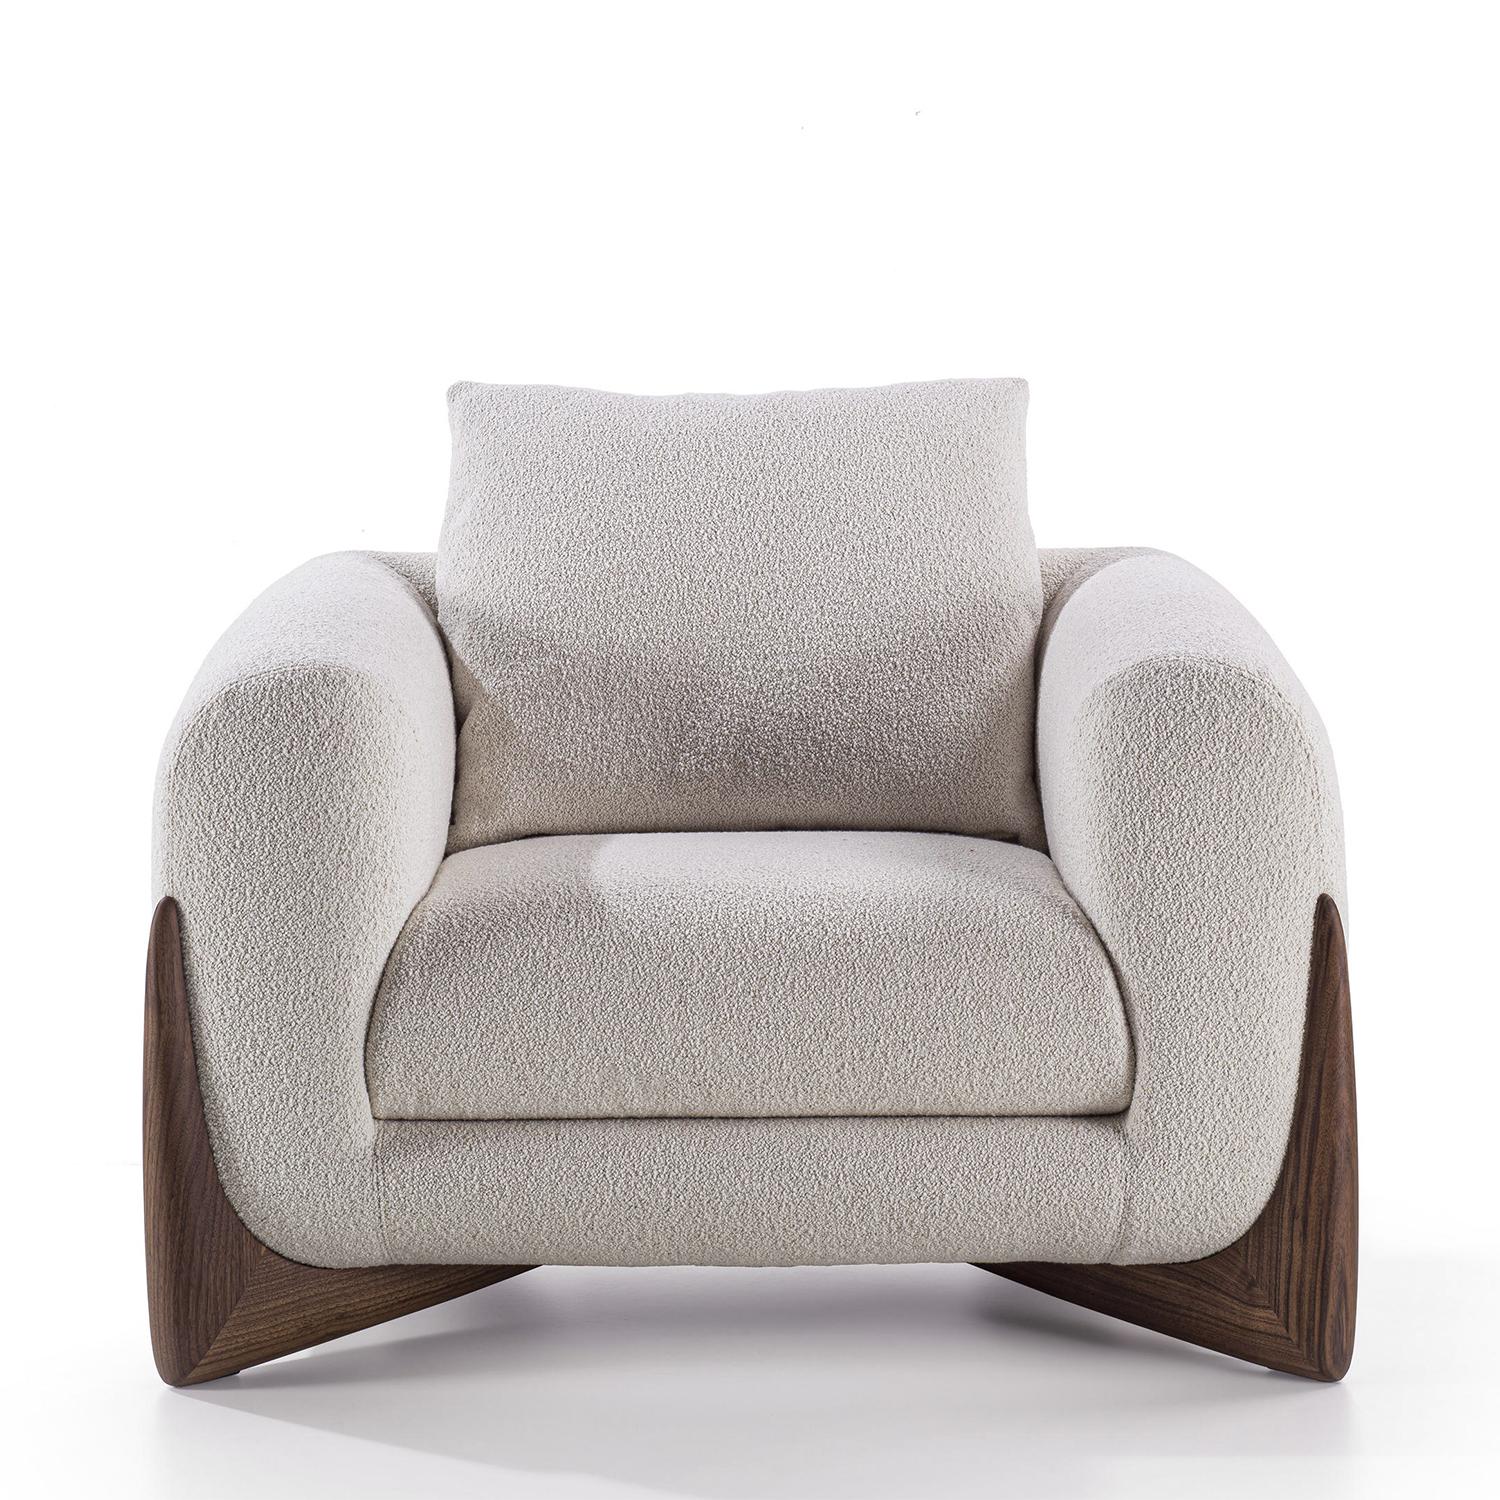 Armchair Parklow with structure in poplar plywood and solid
wood with elastic belts, upholstered and covered with bouclé
fabric fixed in leather, removable fabric, padding is in crush-proof
polyurethane foam with different densities. With seat